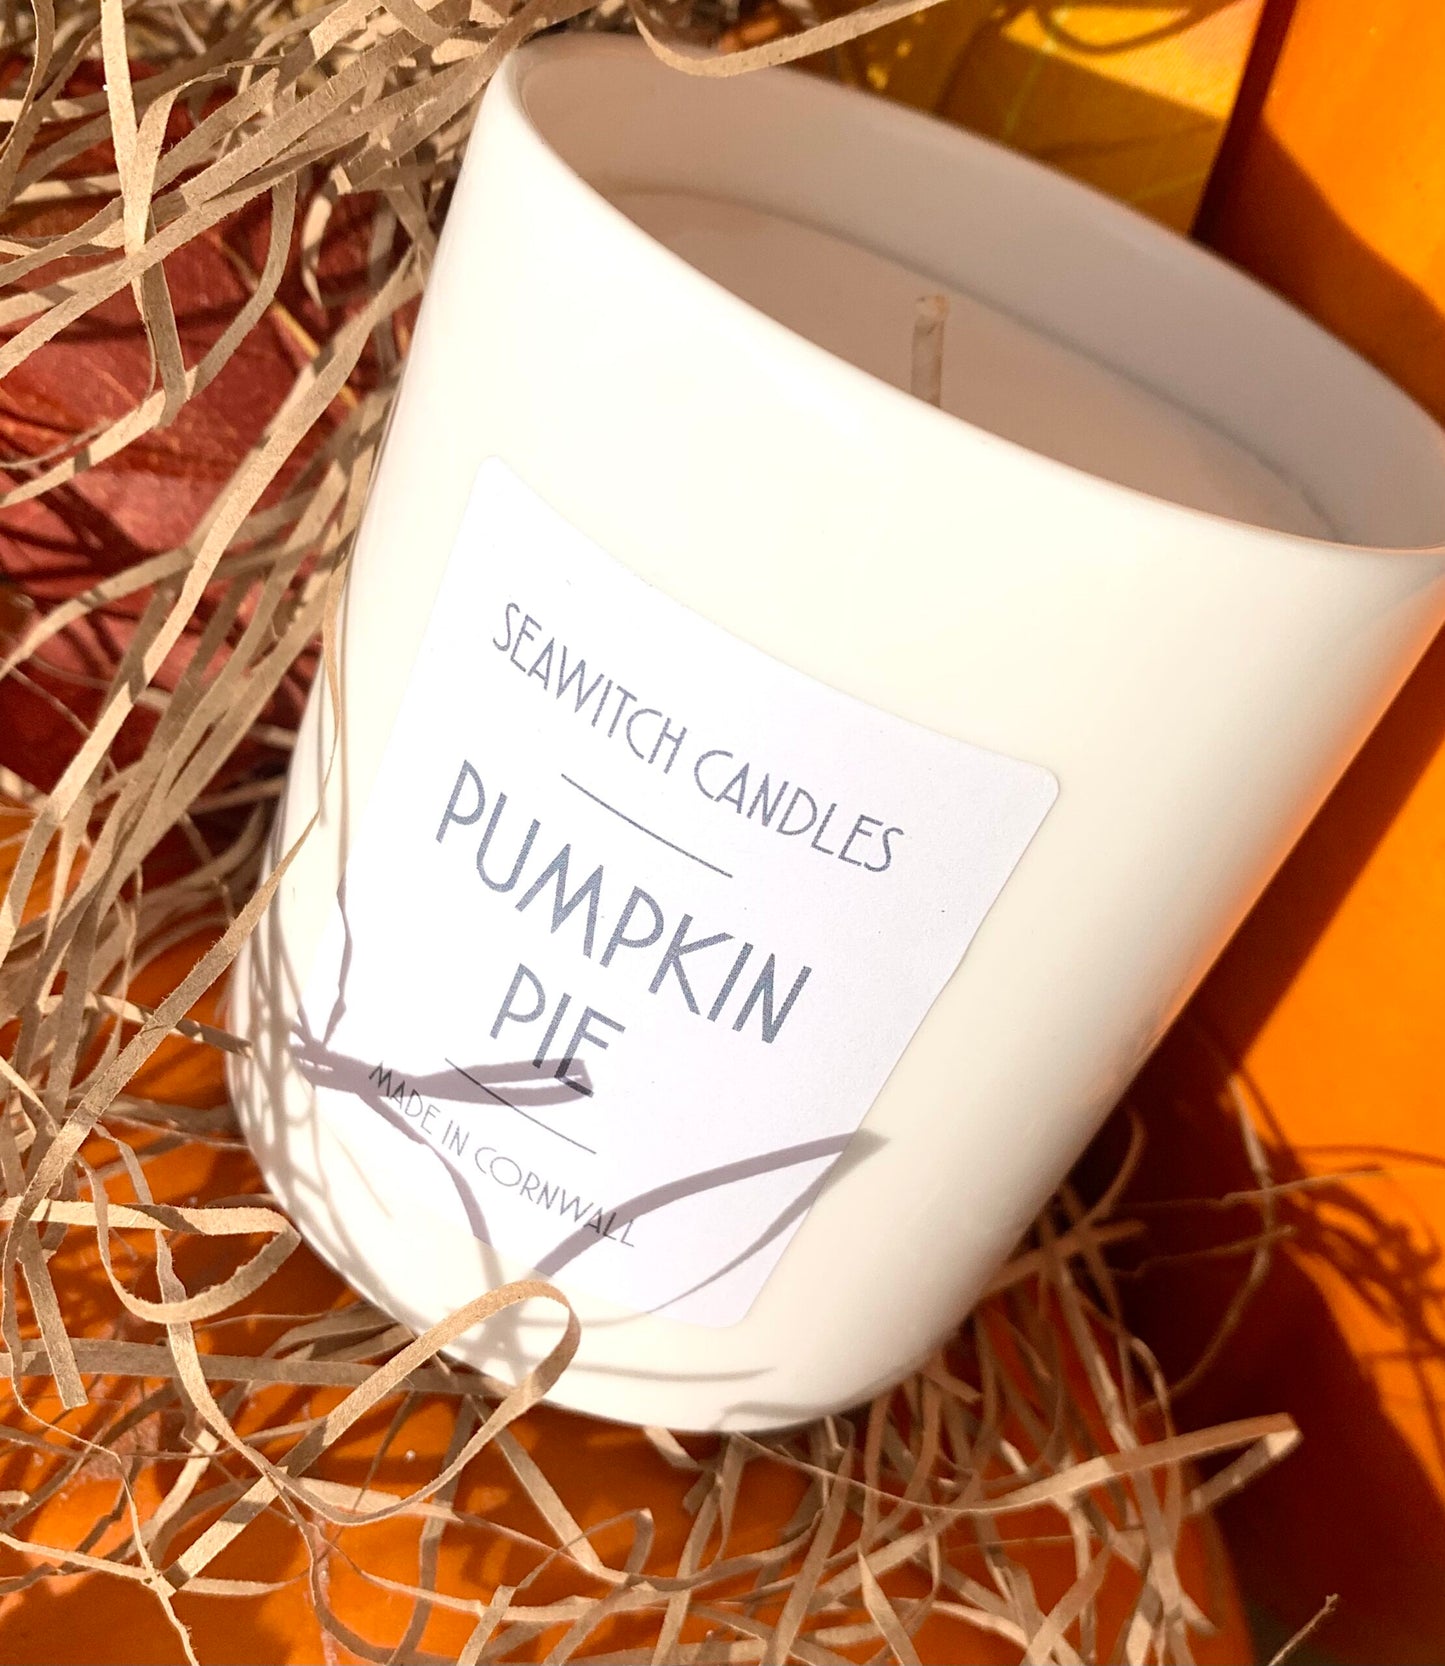 Pumpkin Pie Scented Candle&nbsp;  £20  Caramelised citrus blended with nutmeg, ginger and &nbsp;clove wrapped in a blanket of vanilla  &nbsp;Burn time of at least 50 hours  Ingredients: natural vegan plant wax, fragrance oils, cotton wick  This candle is hand poured into a white china pot and is made in Mousehole, Cornwall by Seawitch Candles Halloween, Pumpkins, Samhain